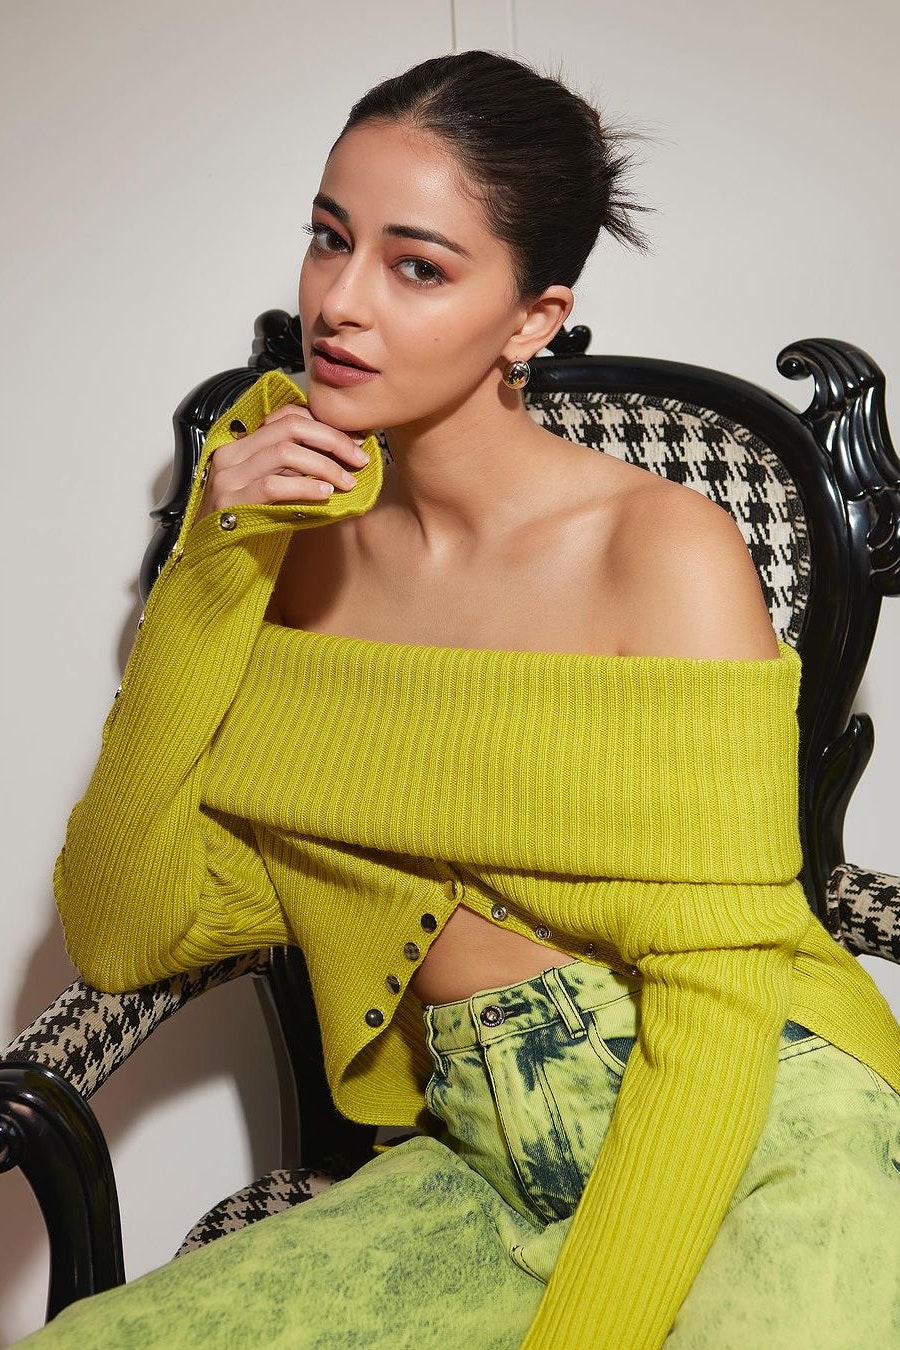 Move over basic jeans, Ananya Panday is showing us how to do it better in lime green